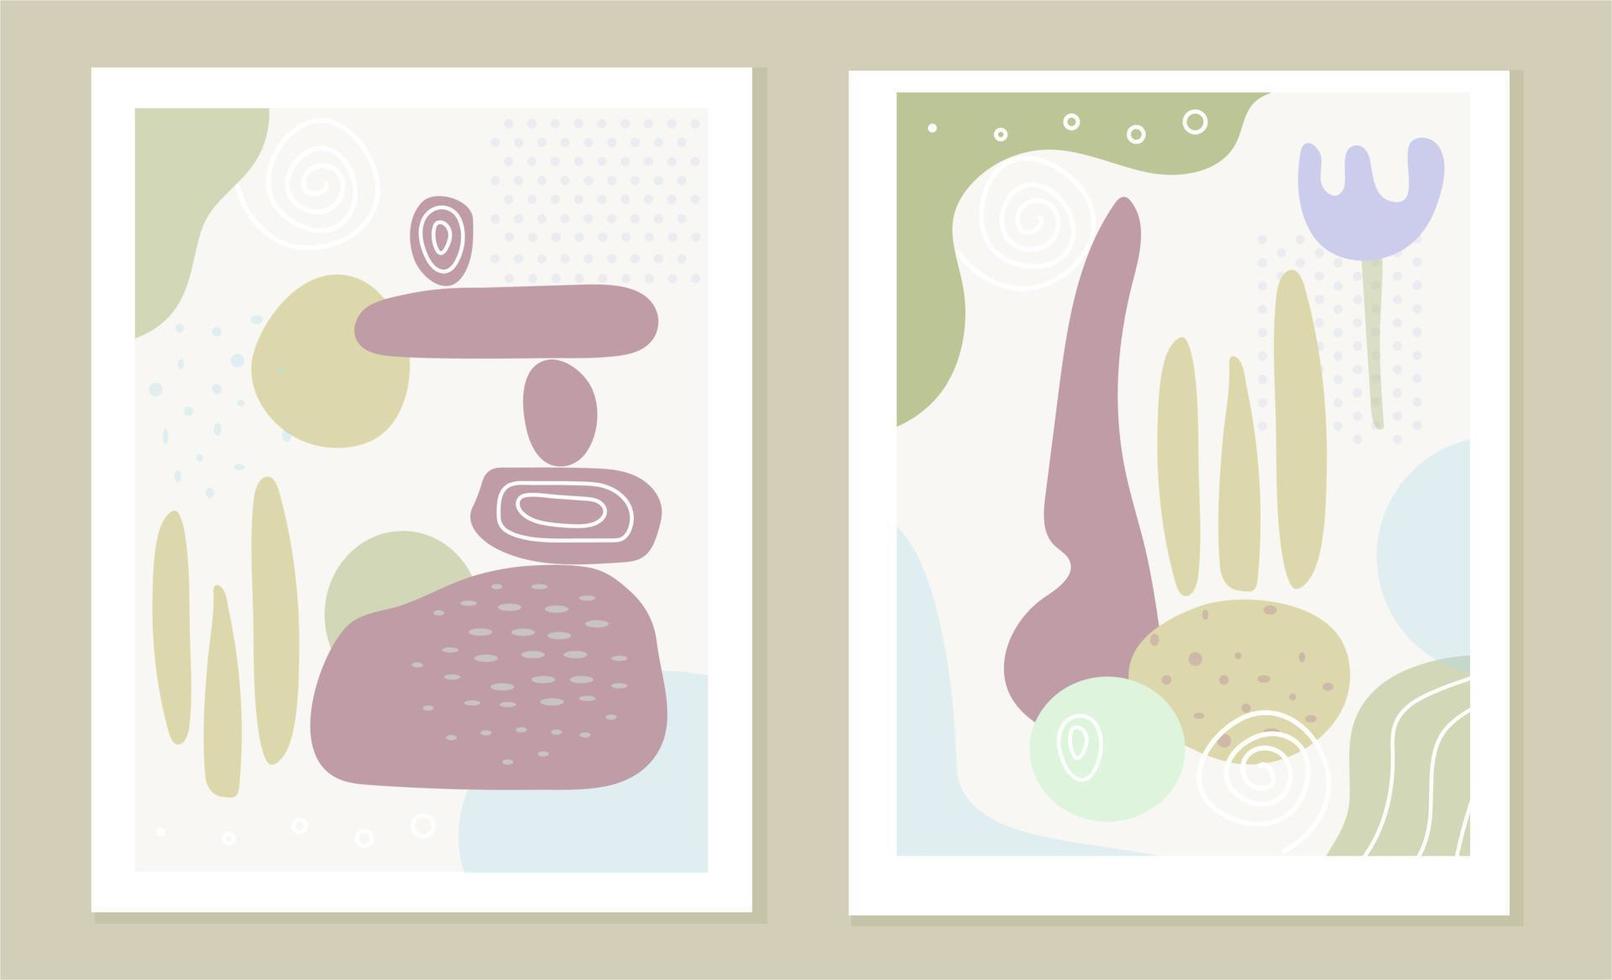 Set of stylish vector templates in pastel colors. Posters with natural abstract shapes. The concept of balance, harmony and ecology.